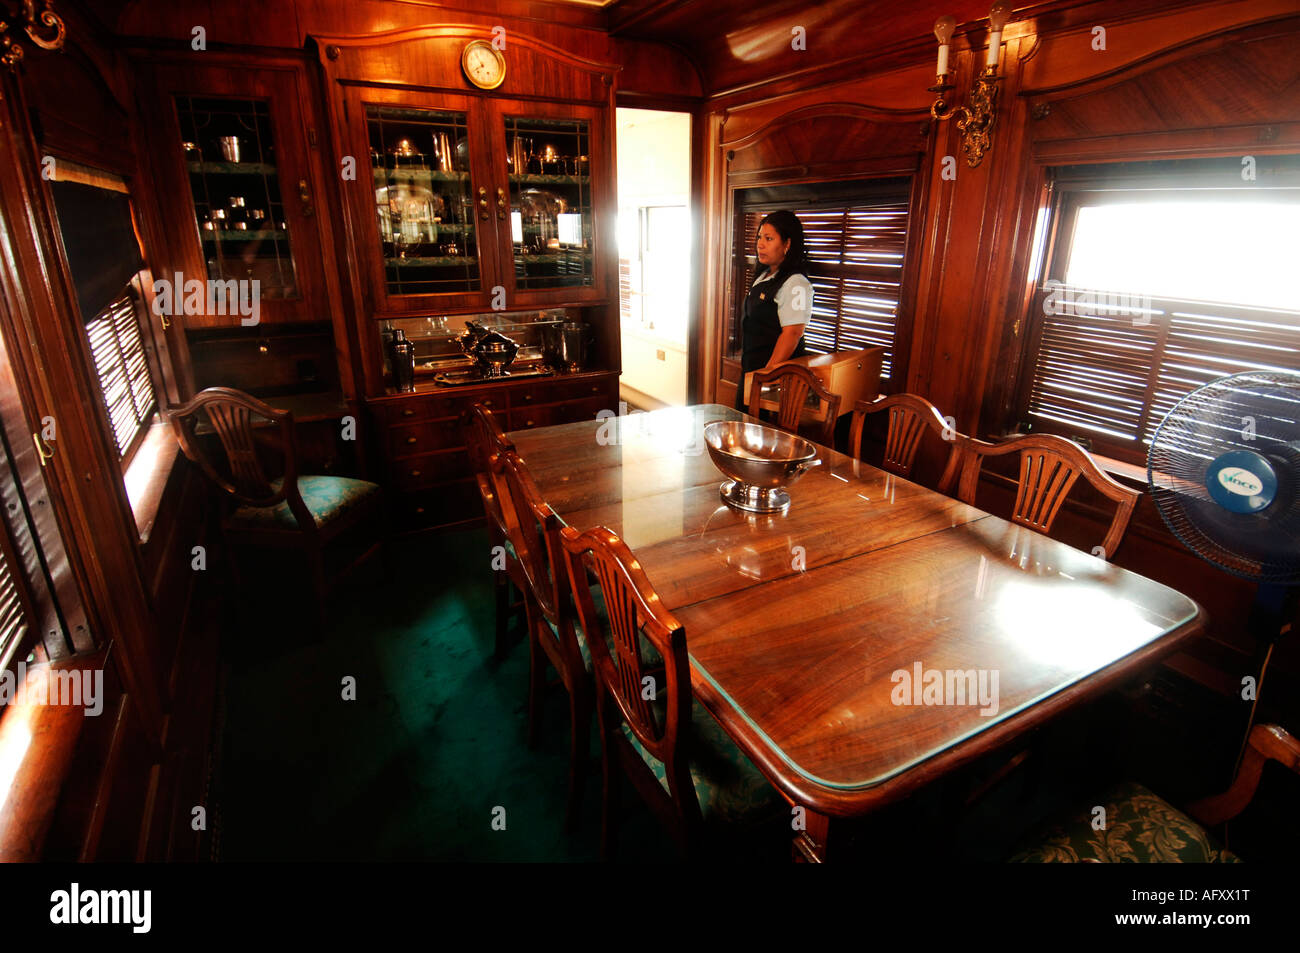 Cuba Havana Habana Vieja dining room of a vintage oldtimer railway car which was used by Che Guevara and Fidel Castro Stock Photo